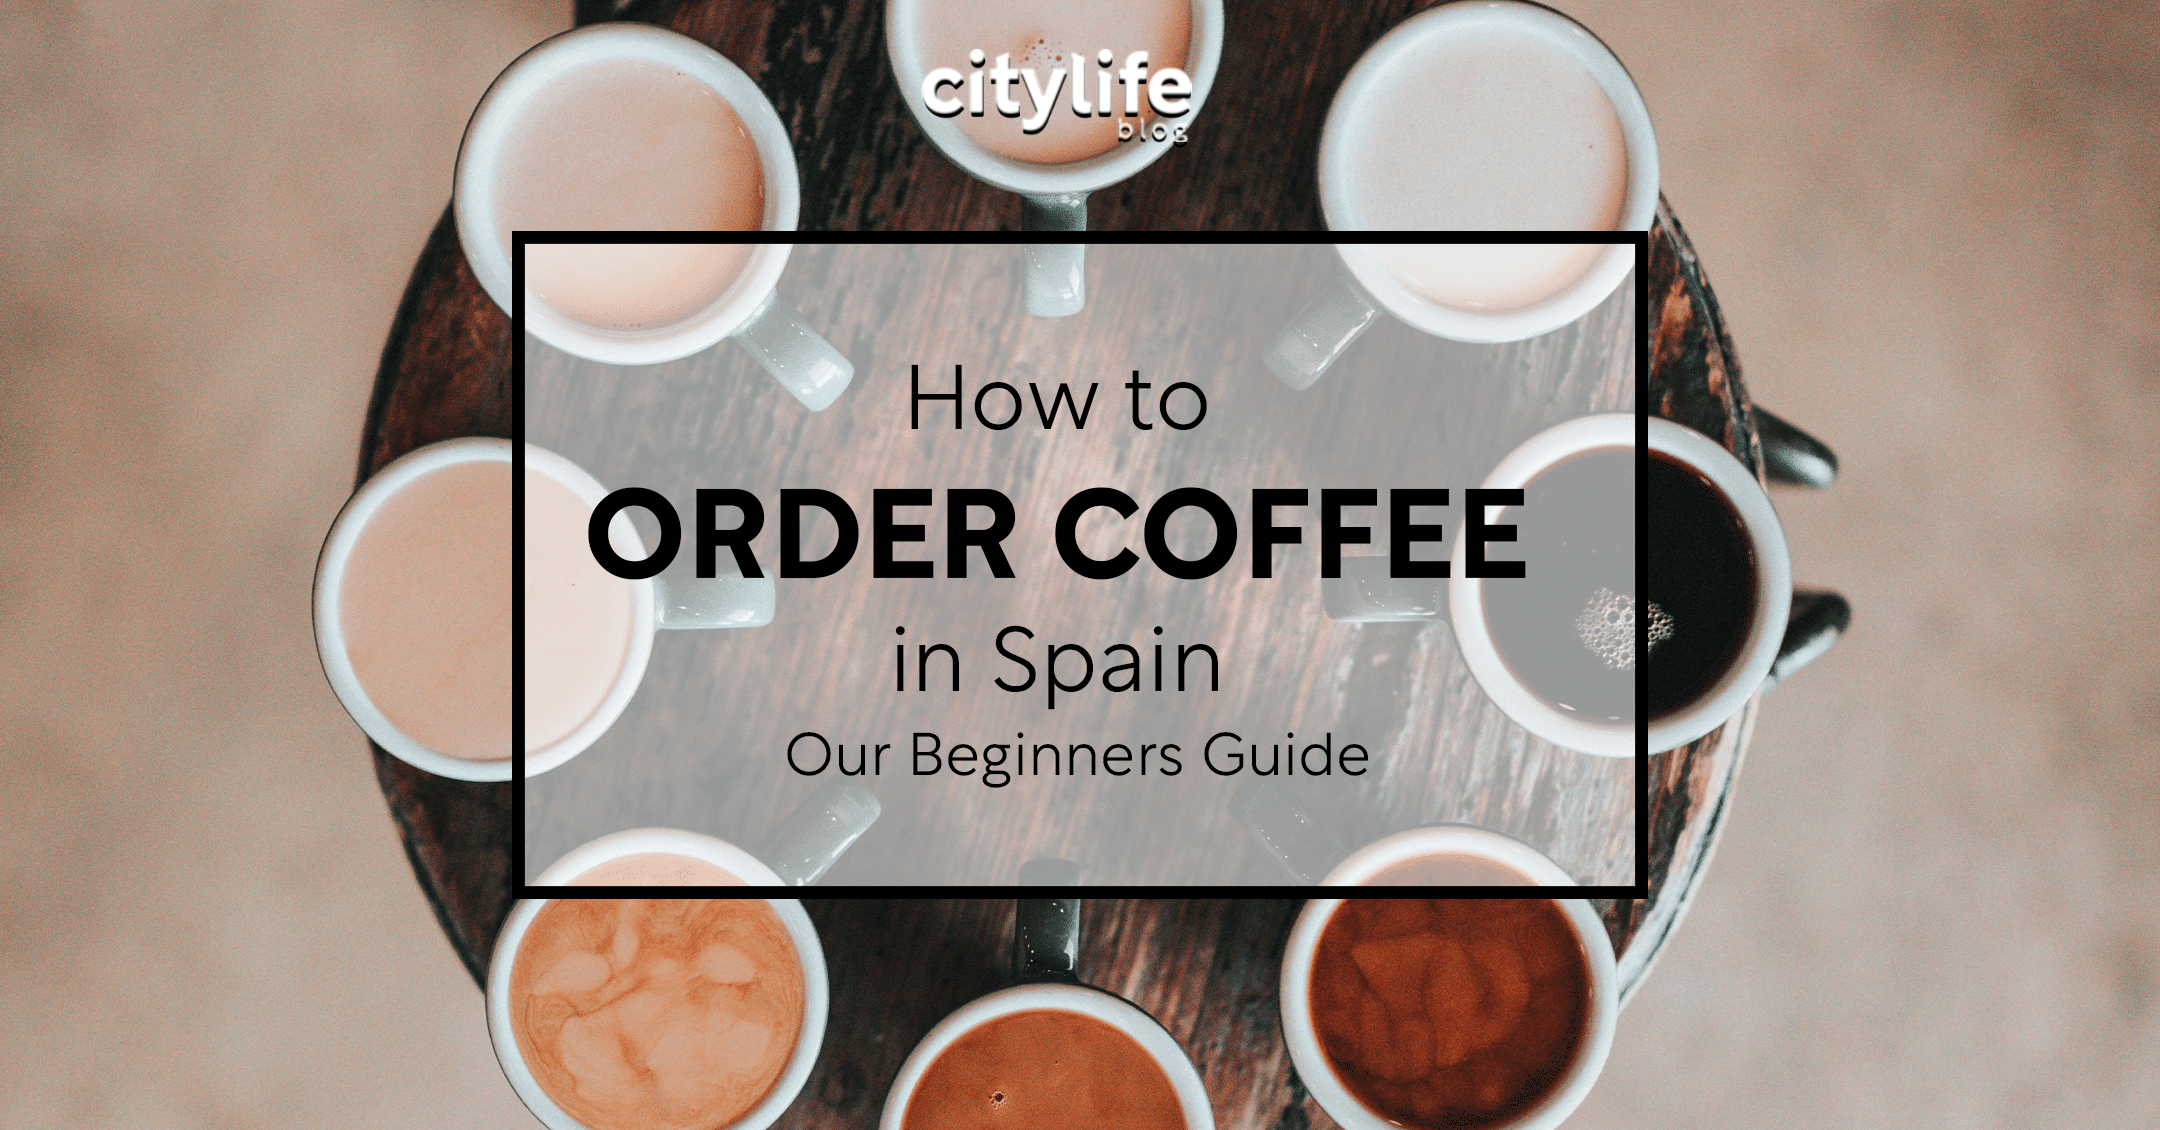 The Full Guide to Coffee On The Go